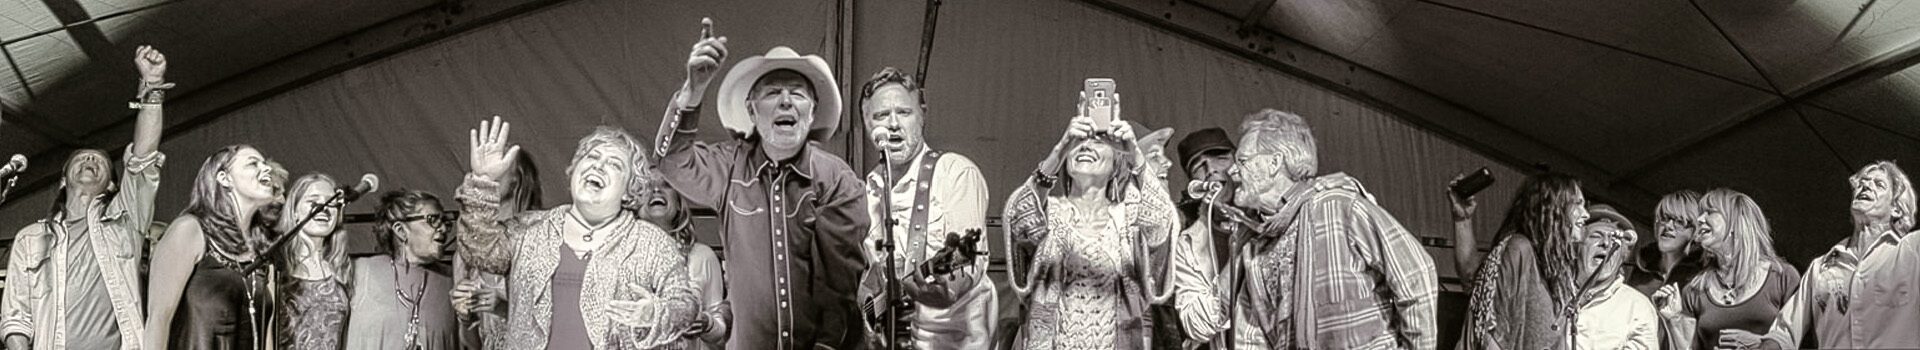 Many performers take the stage at Michael Hearne's Big Barn Dance